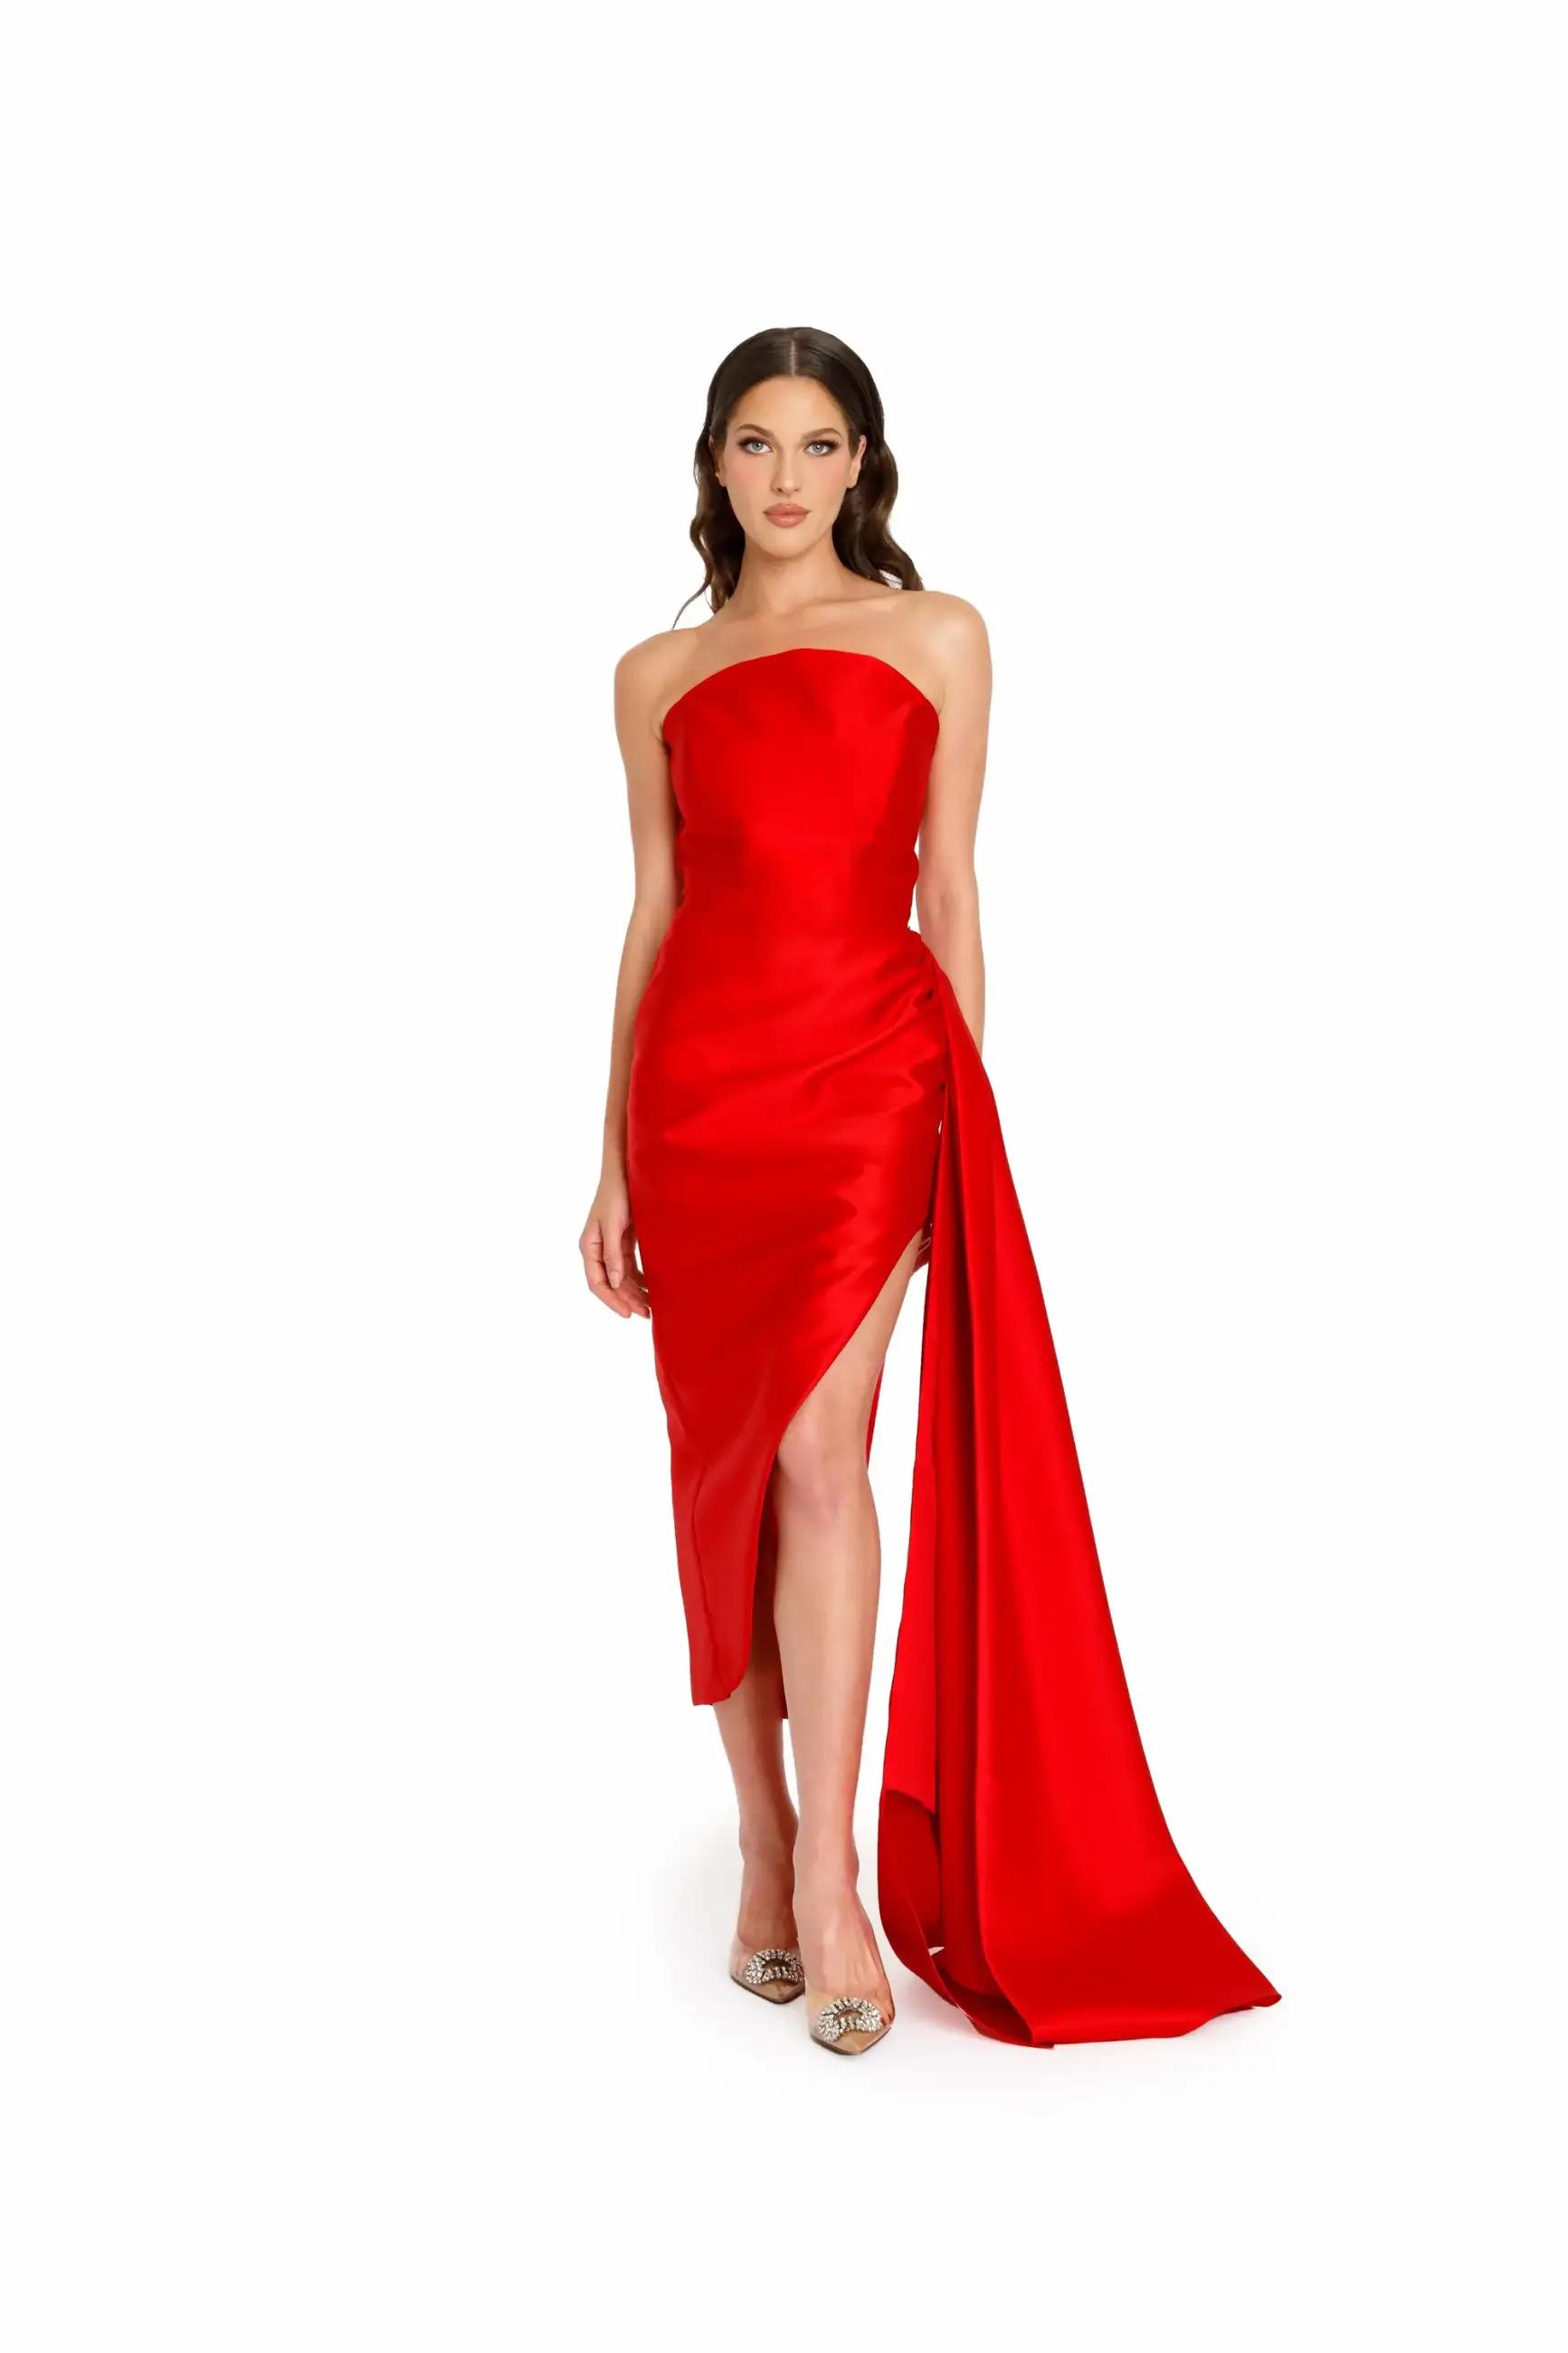 Model wearing a long red evening gown